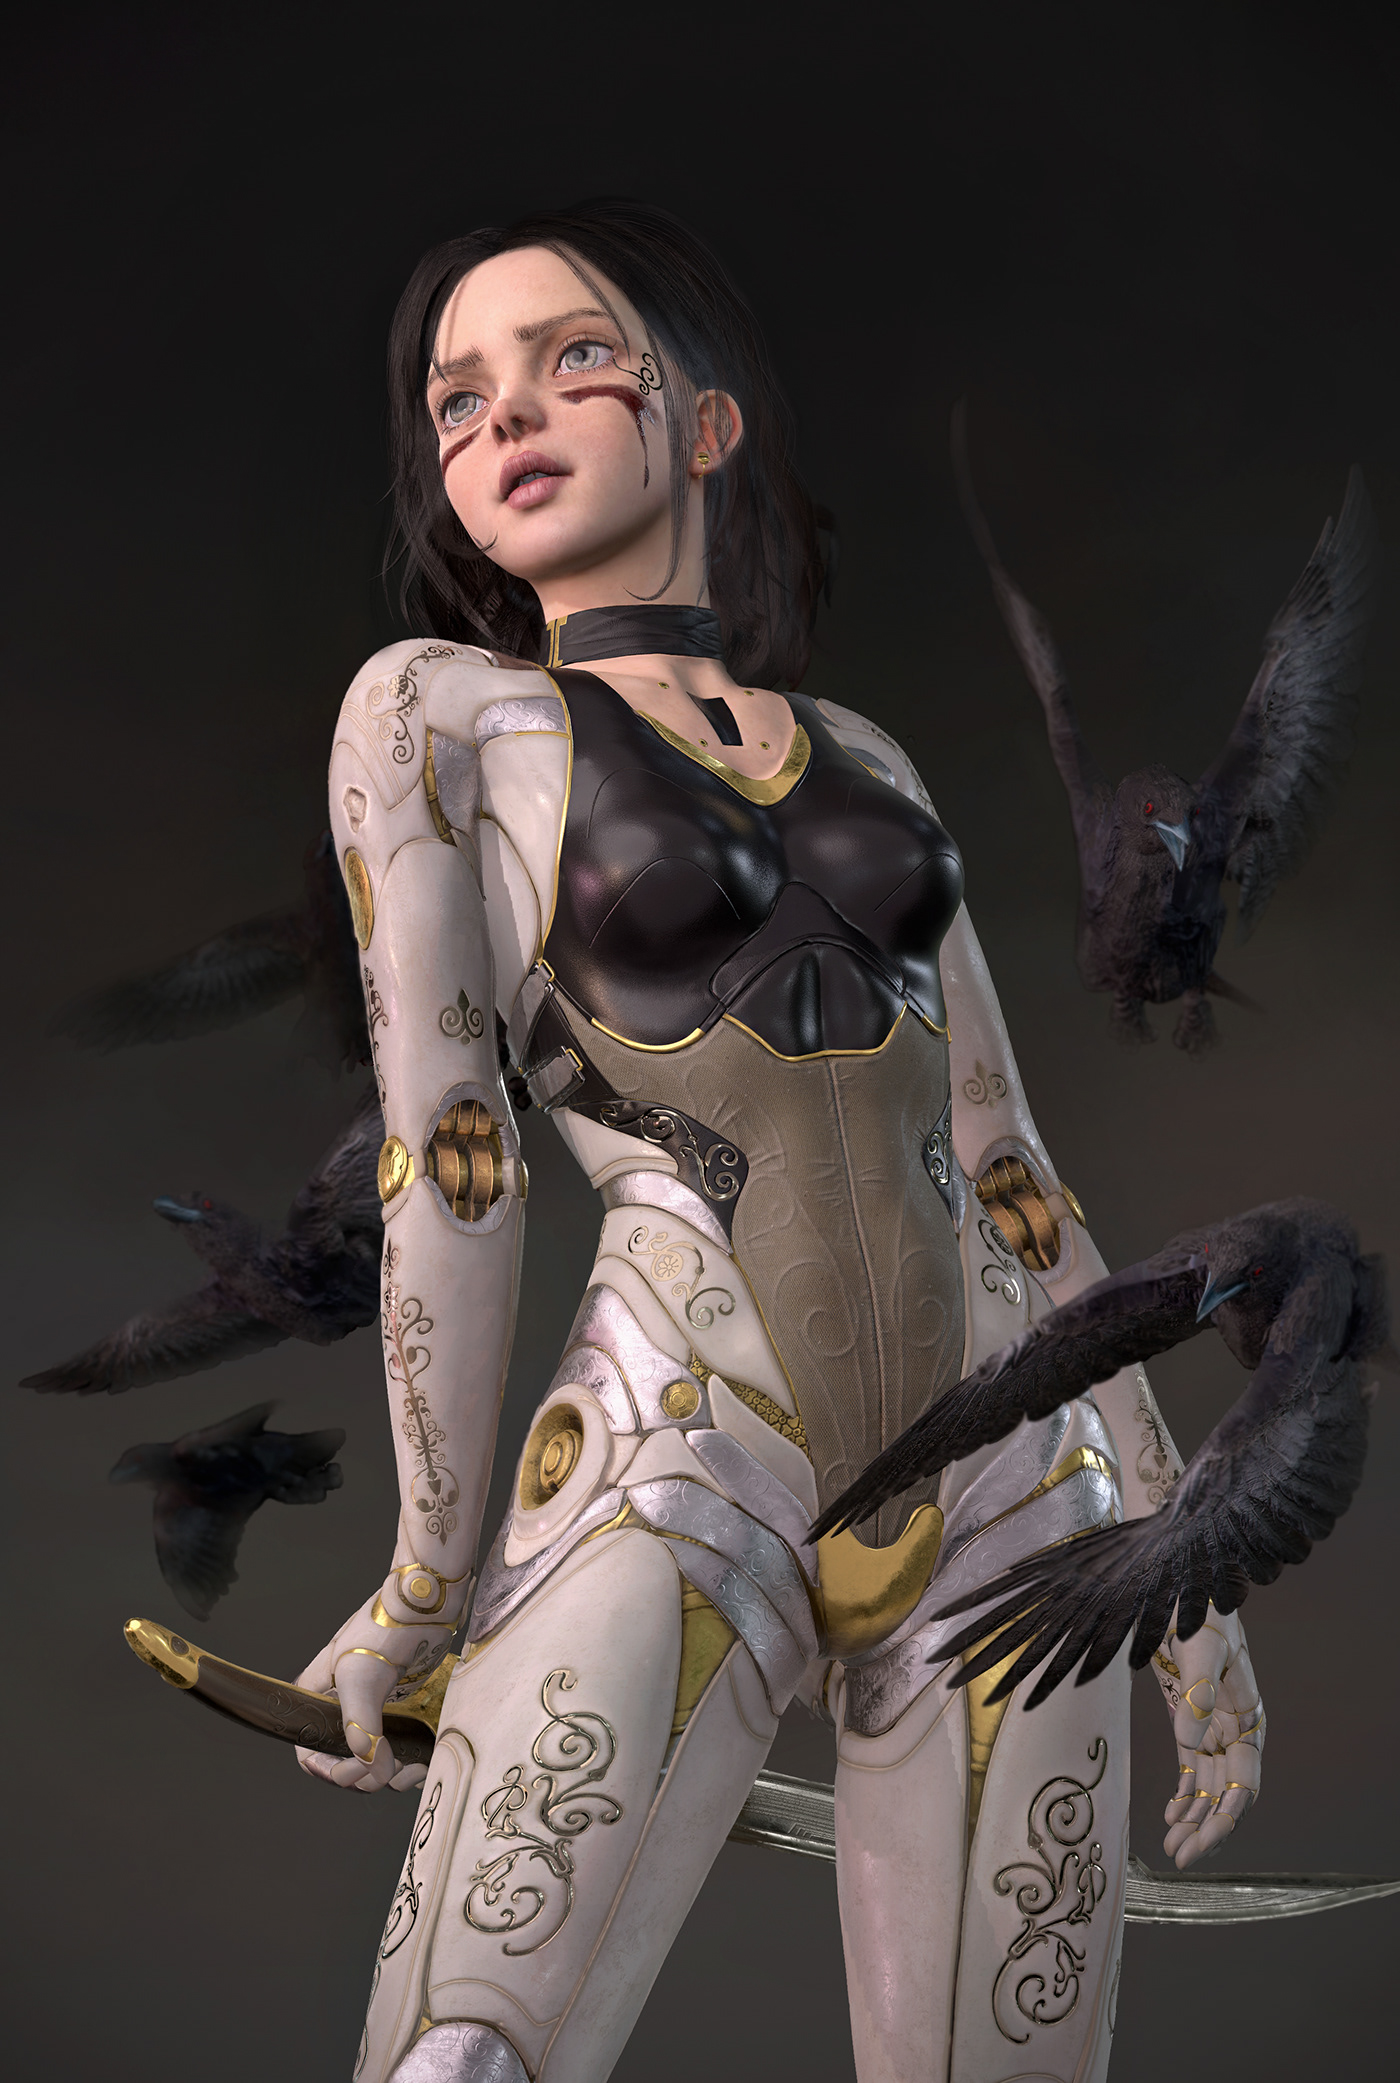 Real time game character of Alita Battle Angel.